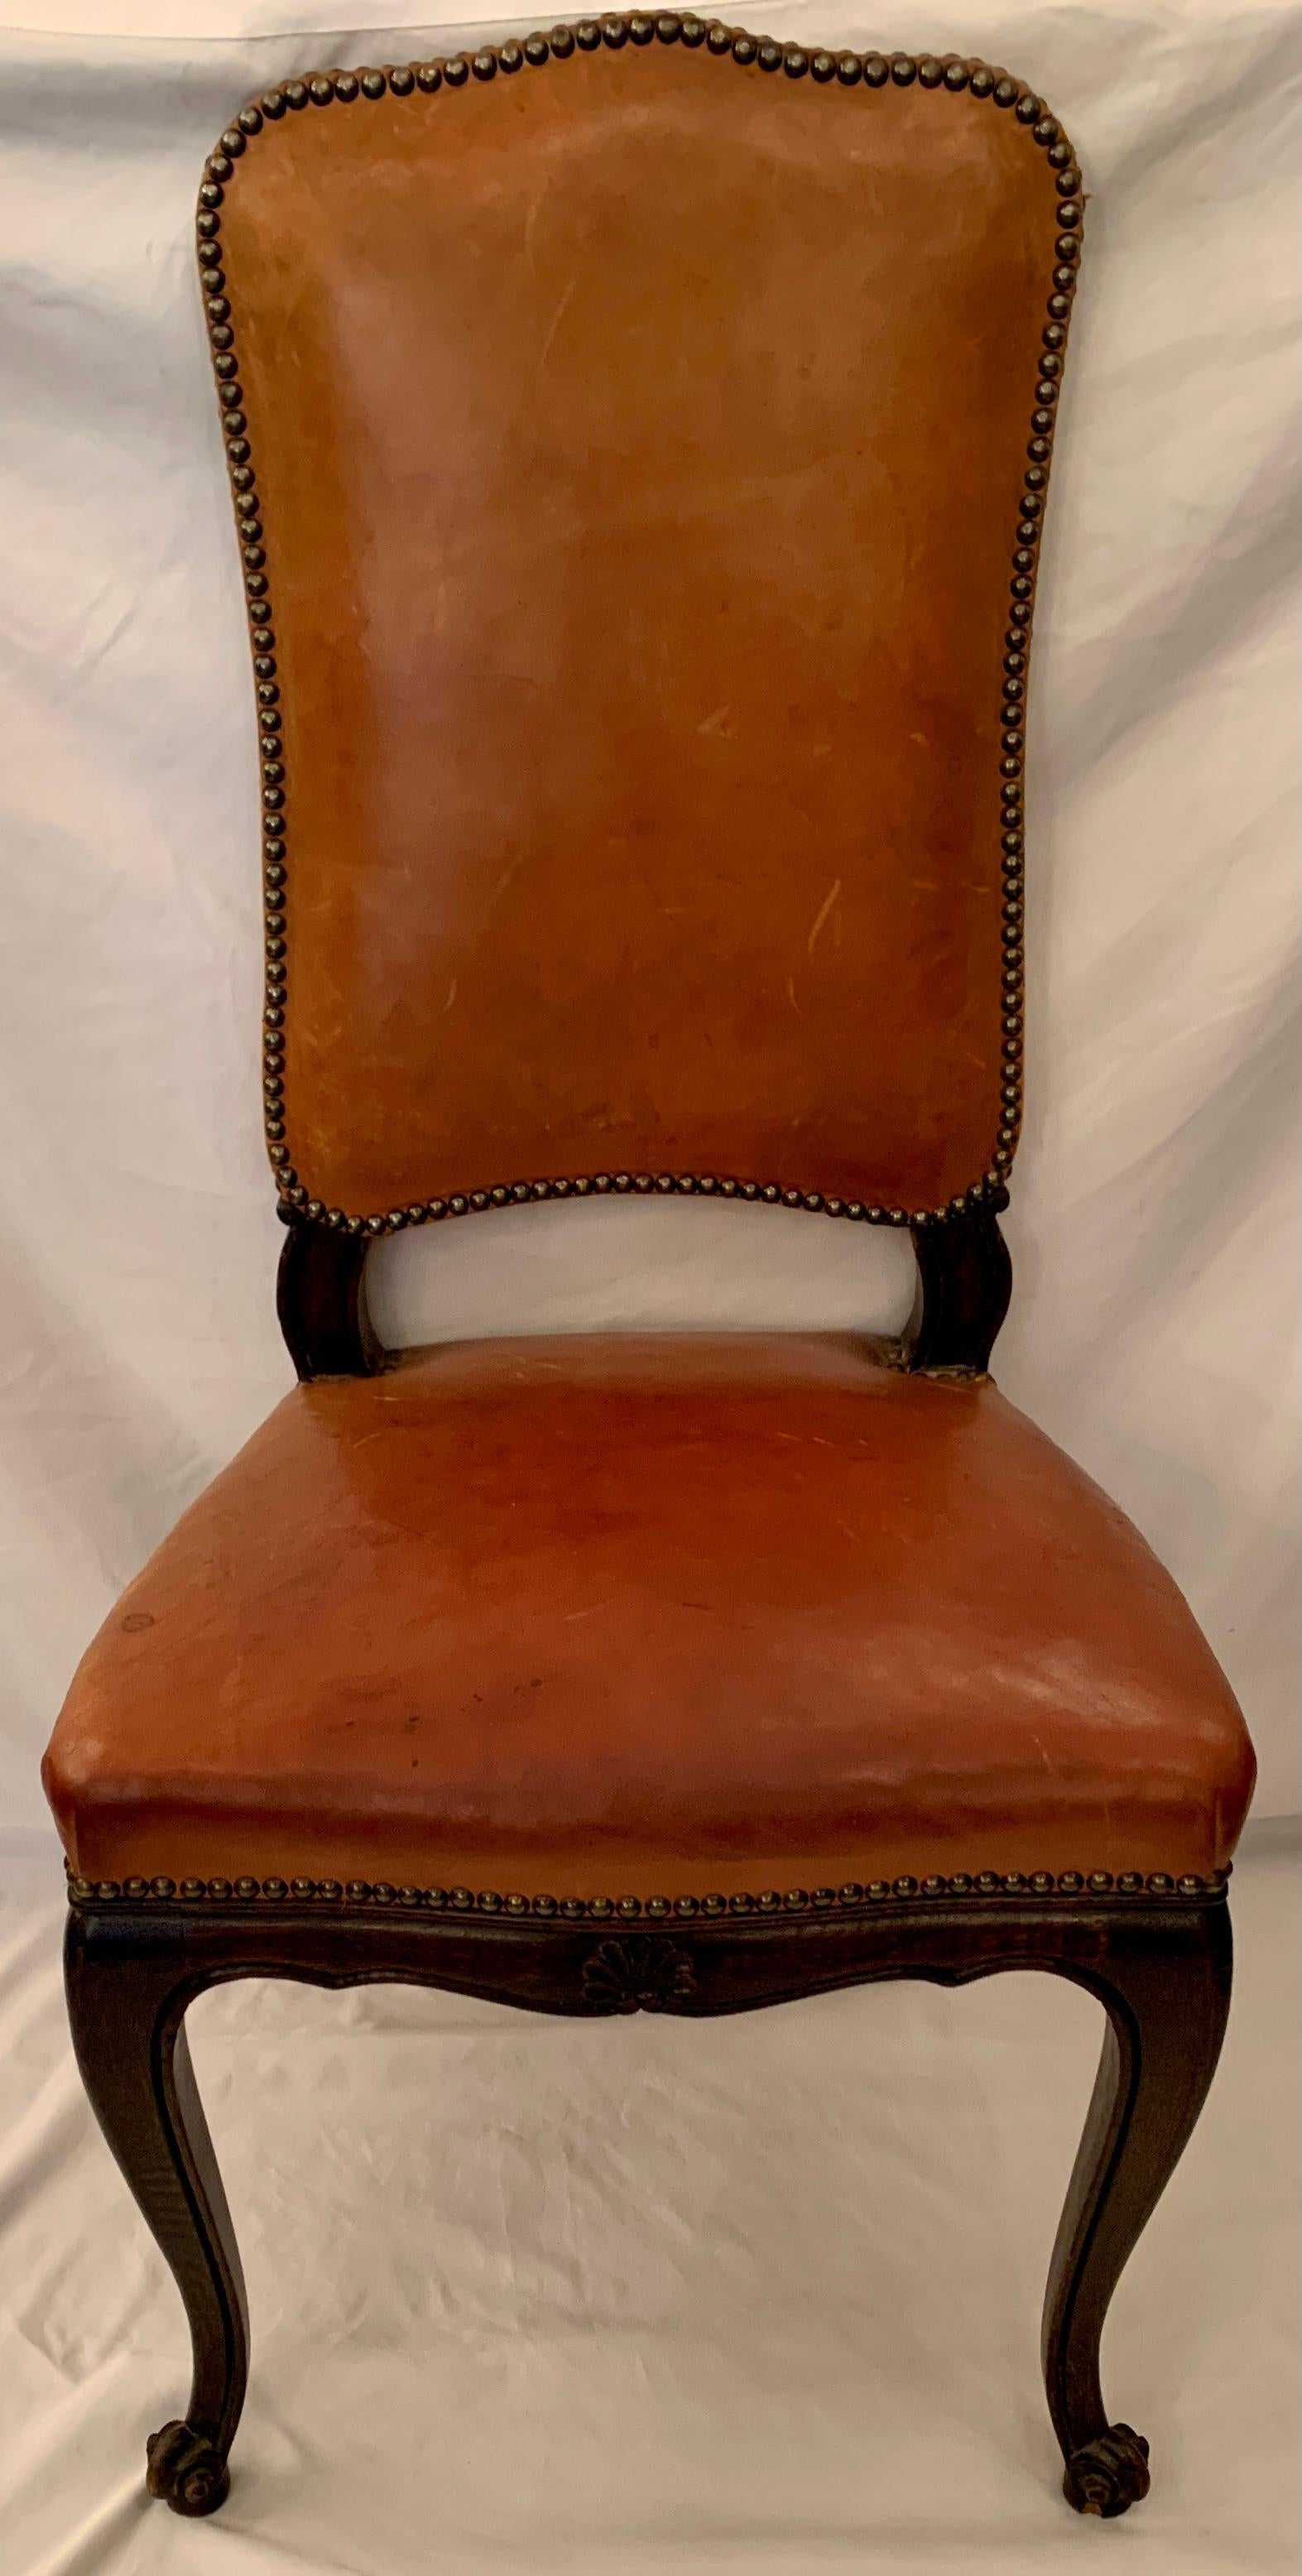 Set of 6 antique leather dining chairs with grommets, Circa 1890-1910.